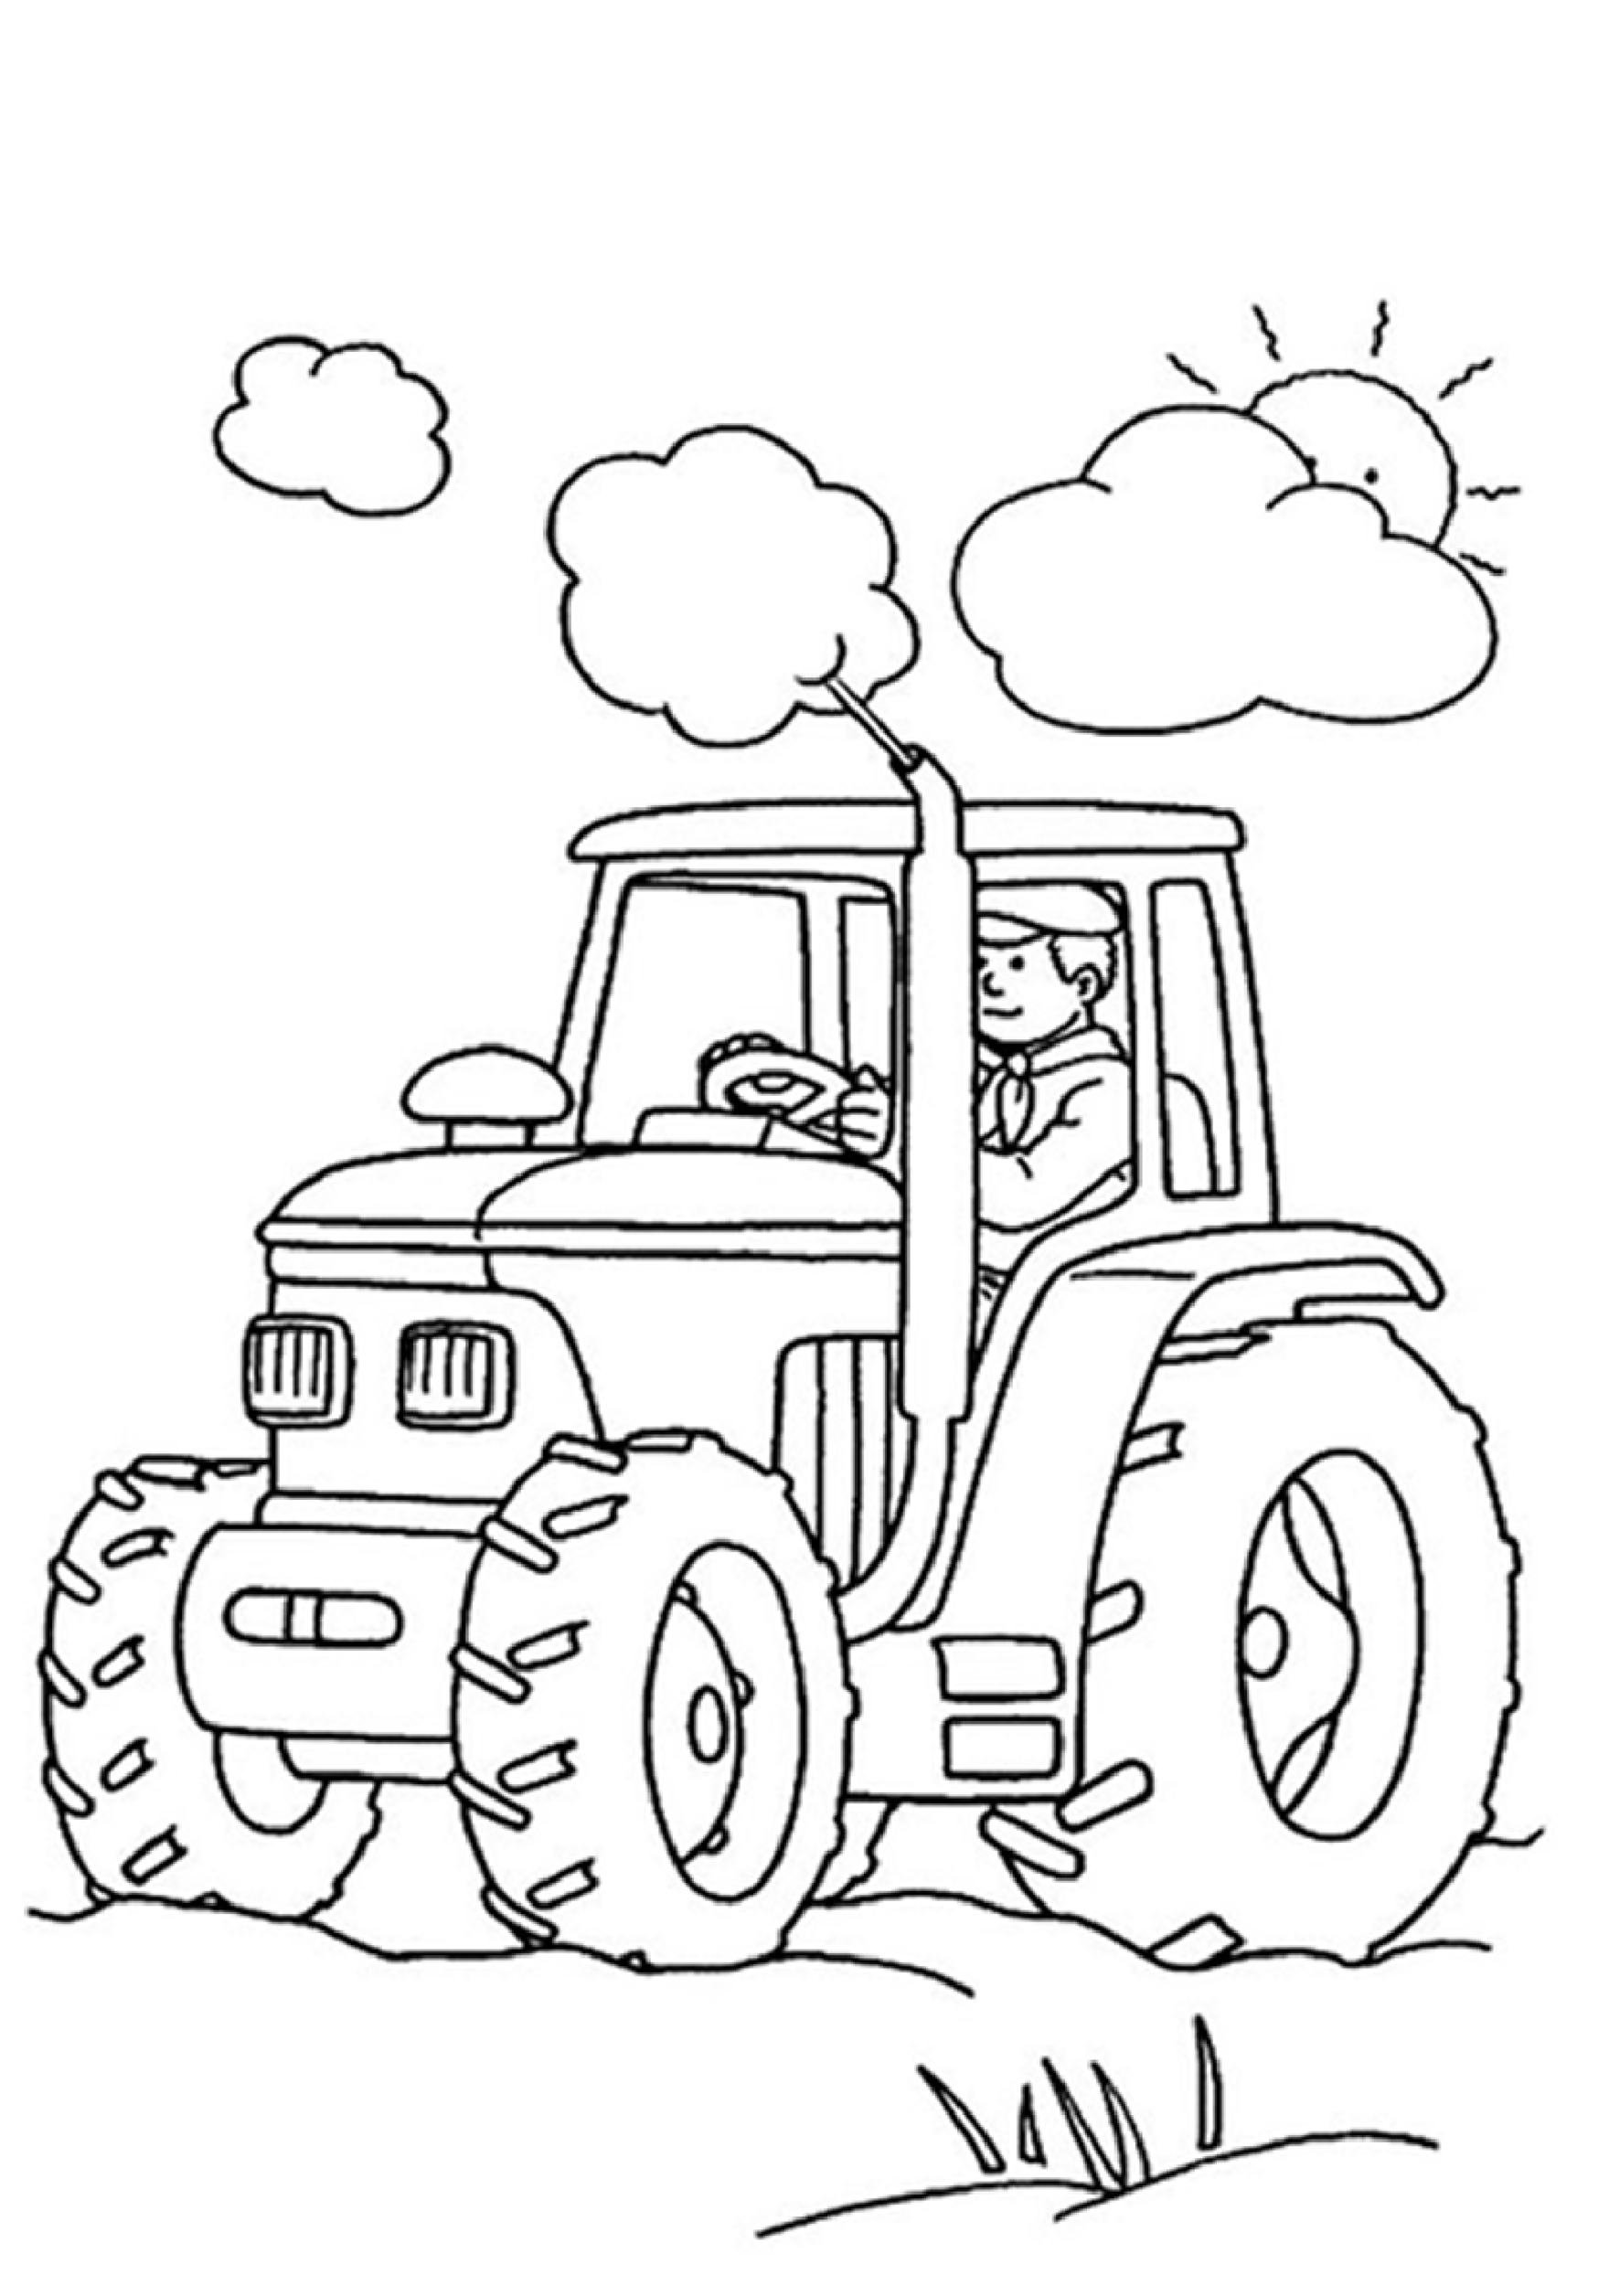 Boy Template Coloring Page - Coloring Pages For All Ages